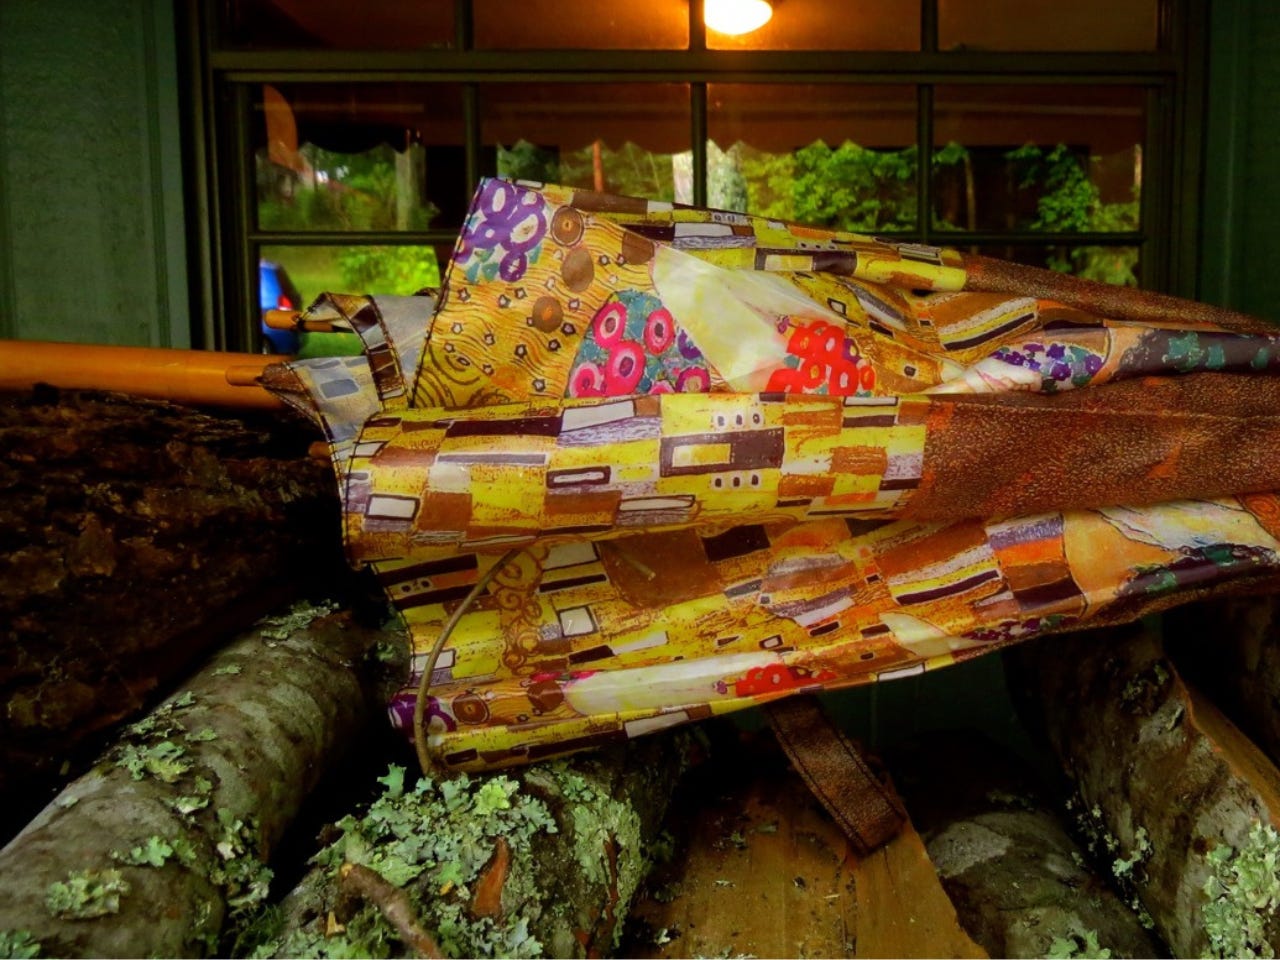 a color photo of an umbrella with a busy, colorful design, laying on top of a stack of wood that has a lot of green lichen growing on it. Behind is a window and an inner area with an overhead light visible. 